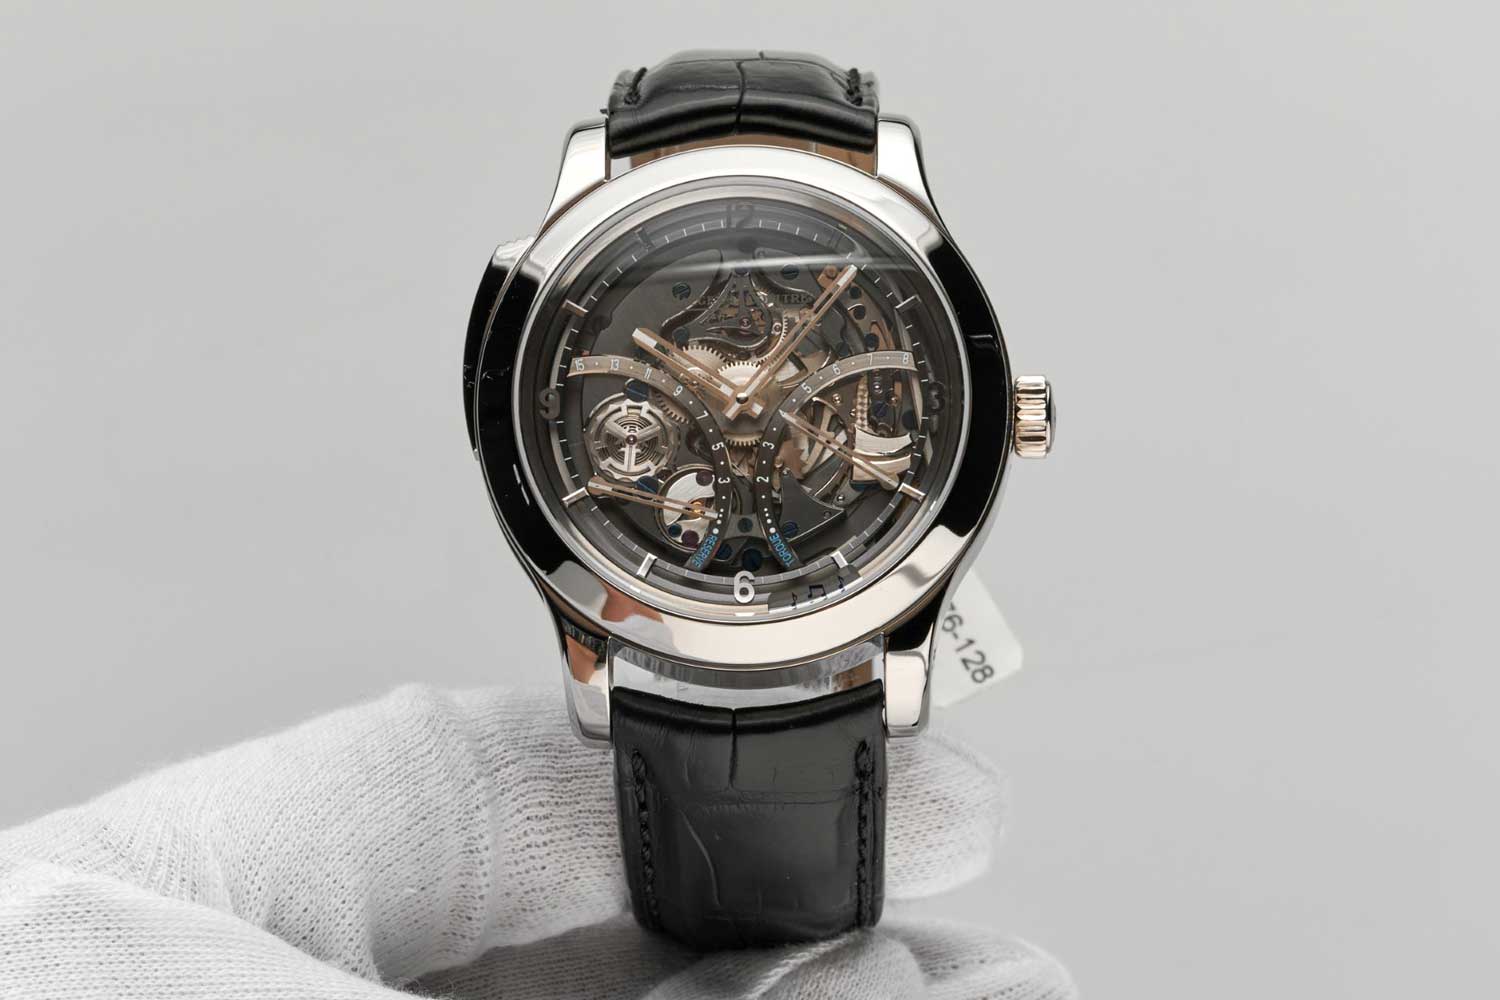 Jaeger-LeCoultre Master Minute Repeater Limited Edition